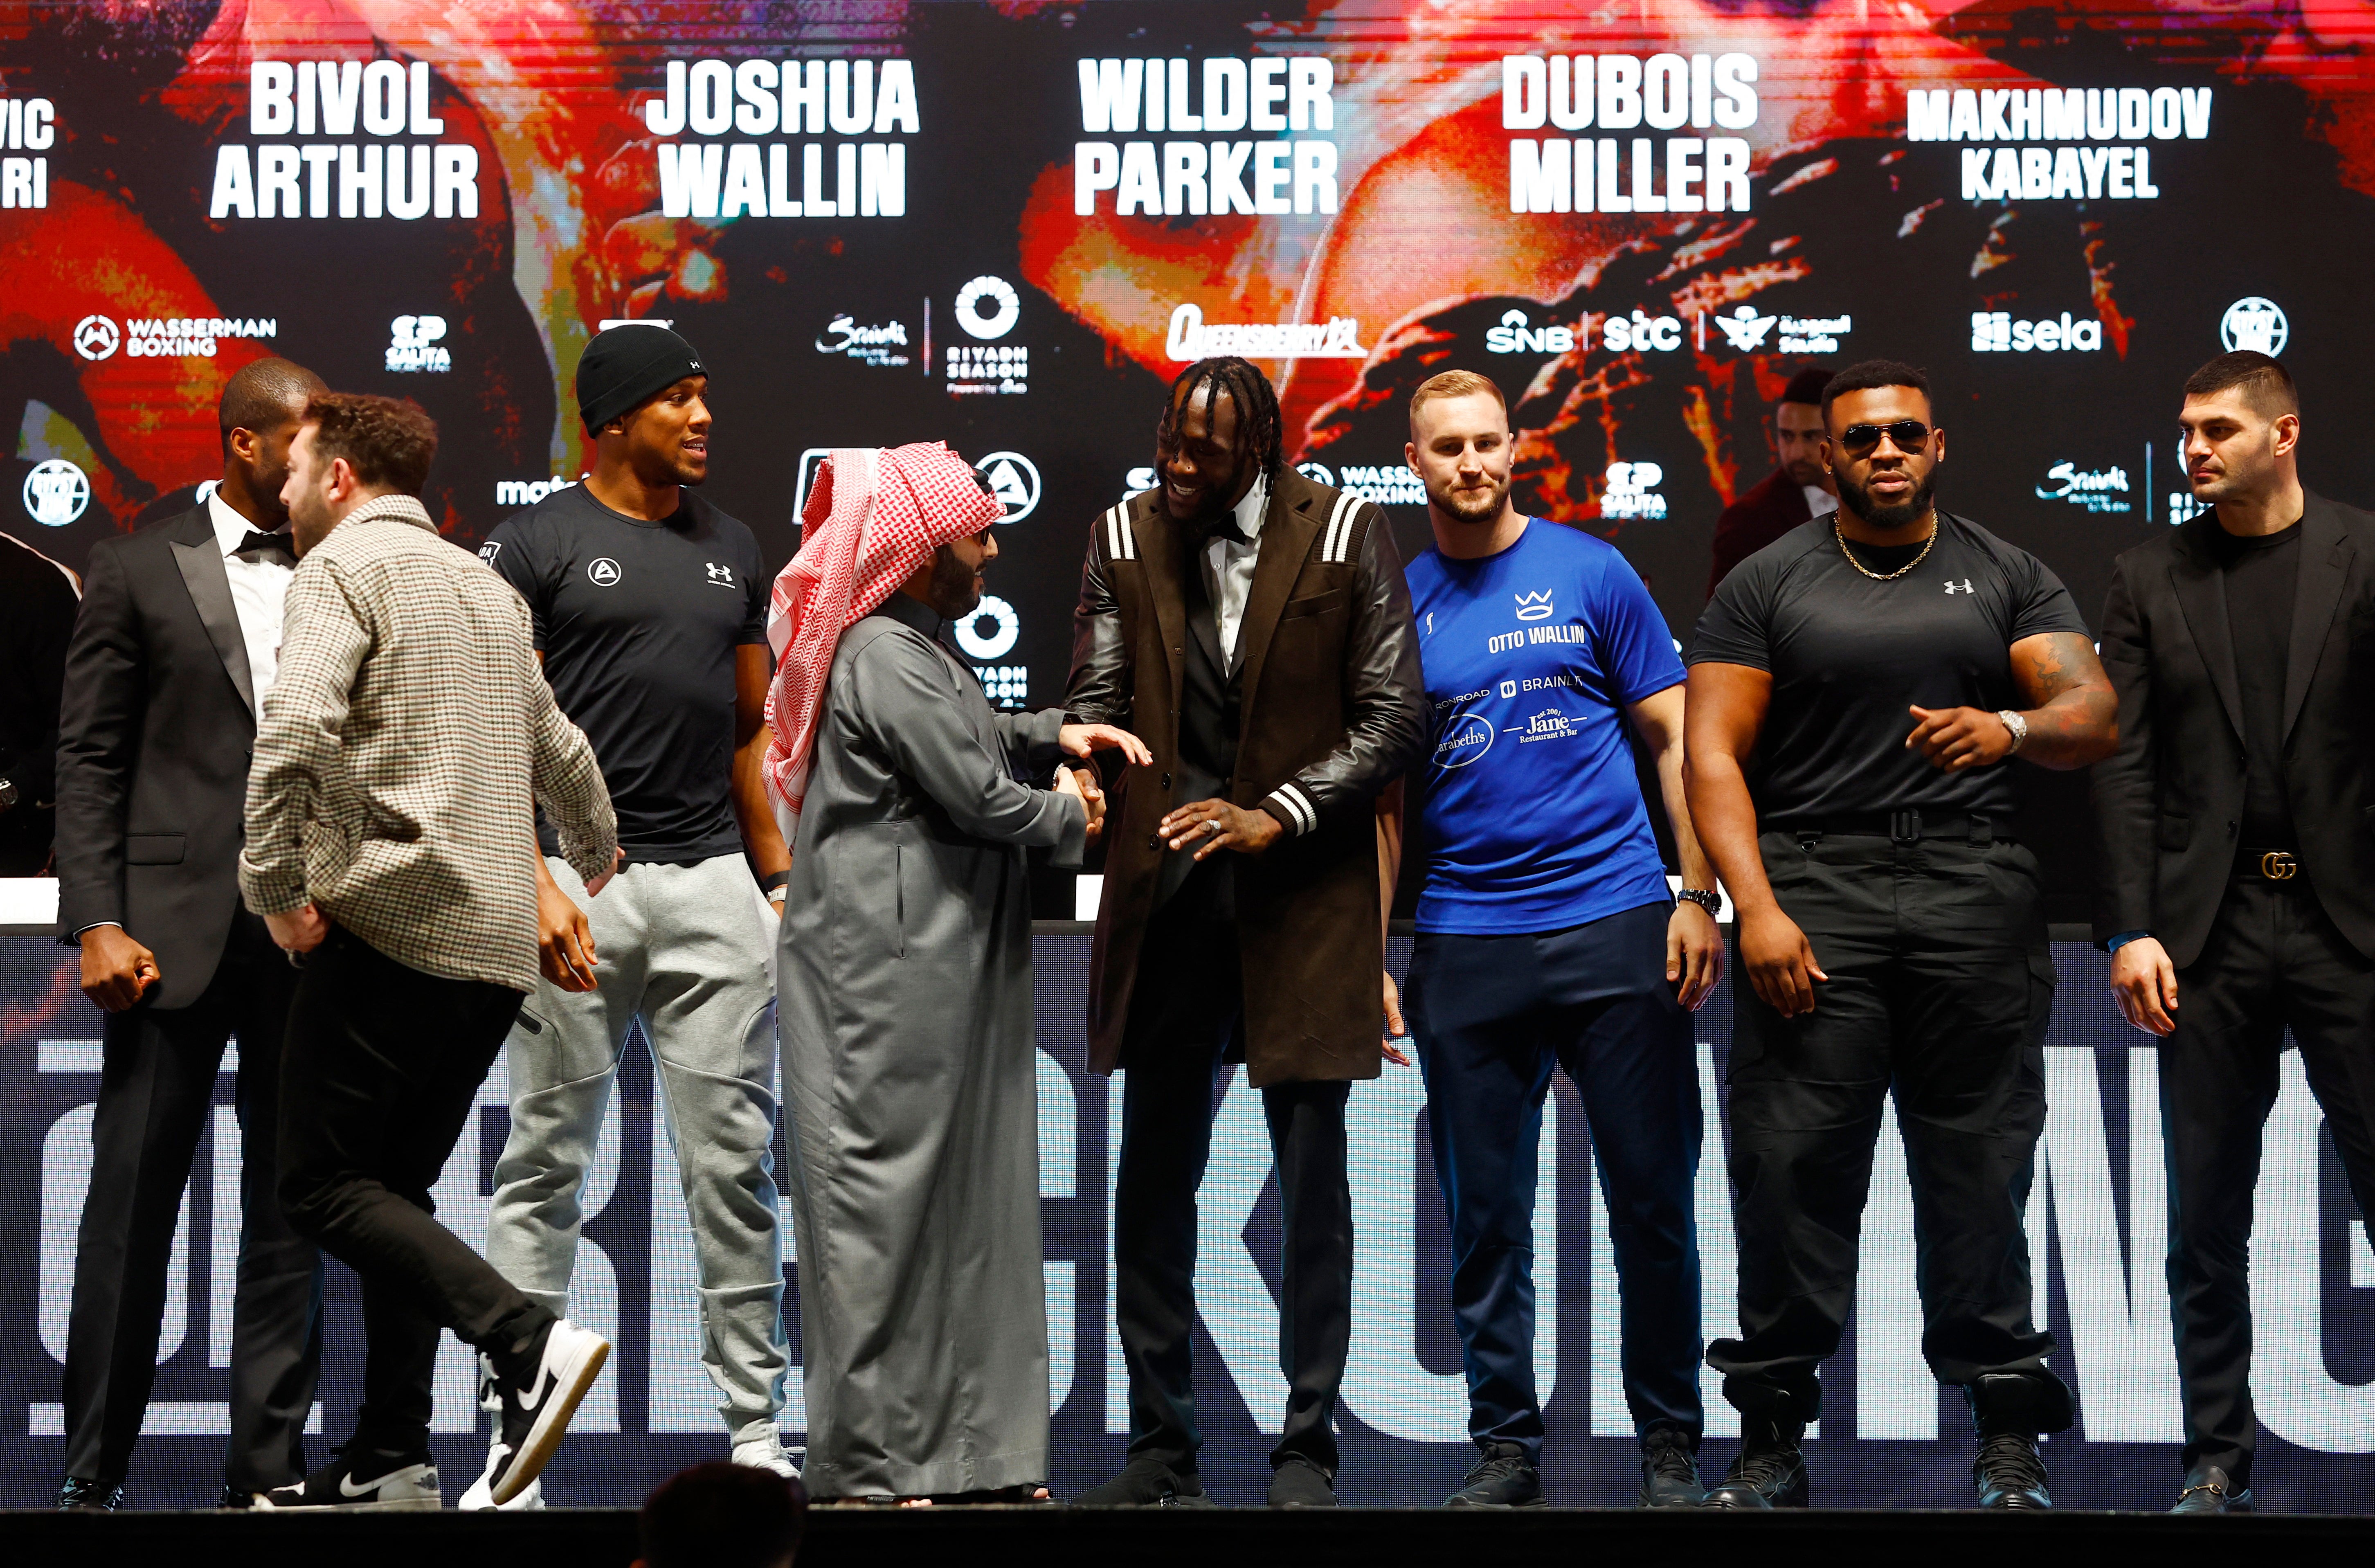 Joshua and Wilder are greeted by Saudi adviser Turki Alalshikh, while standing alongside fellow heavyweights